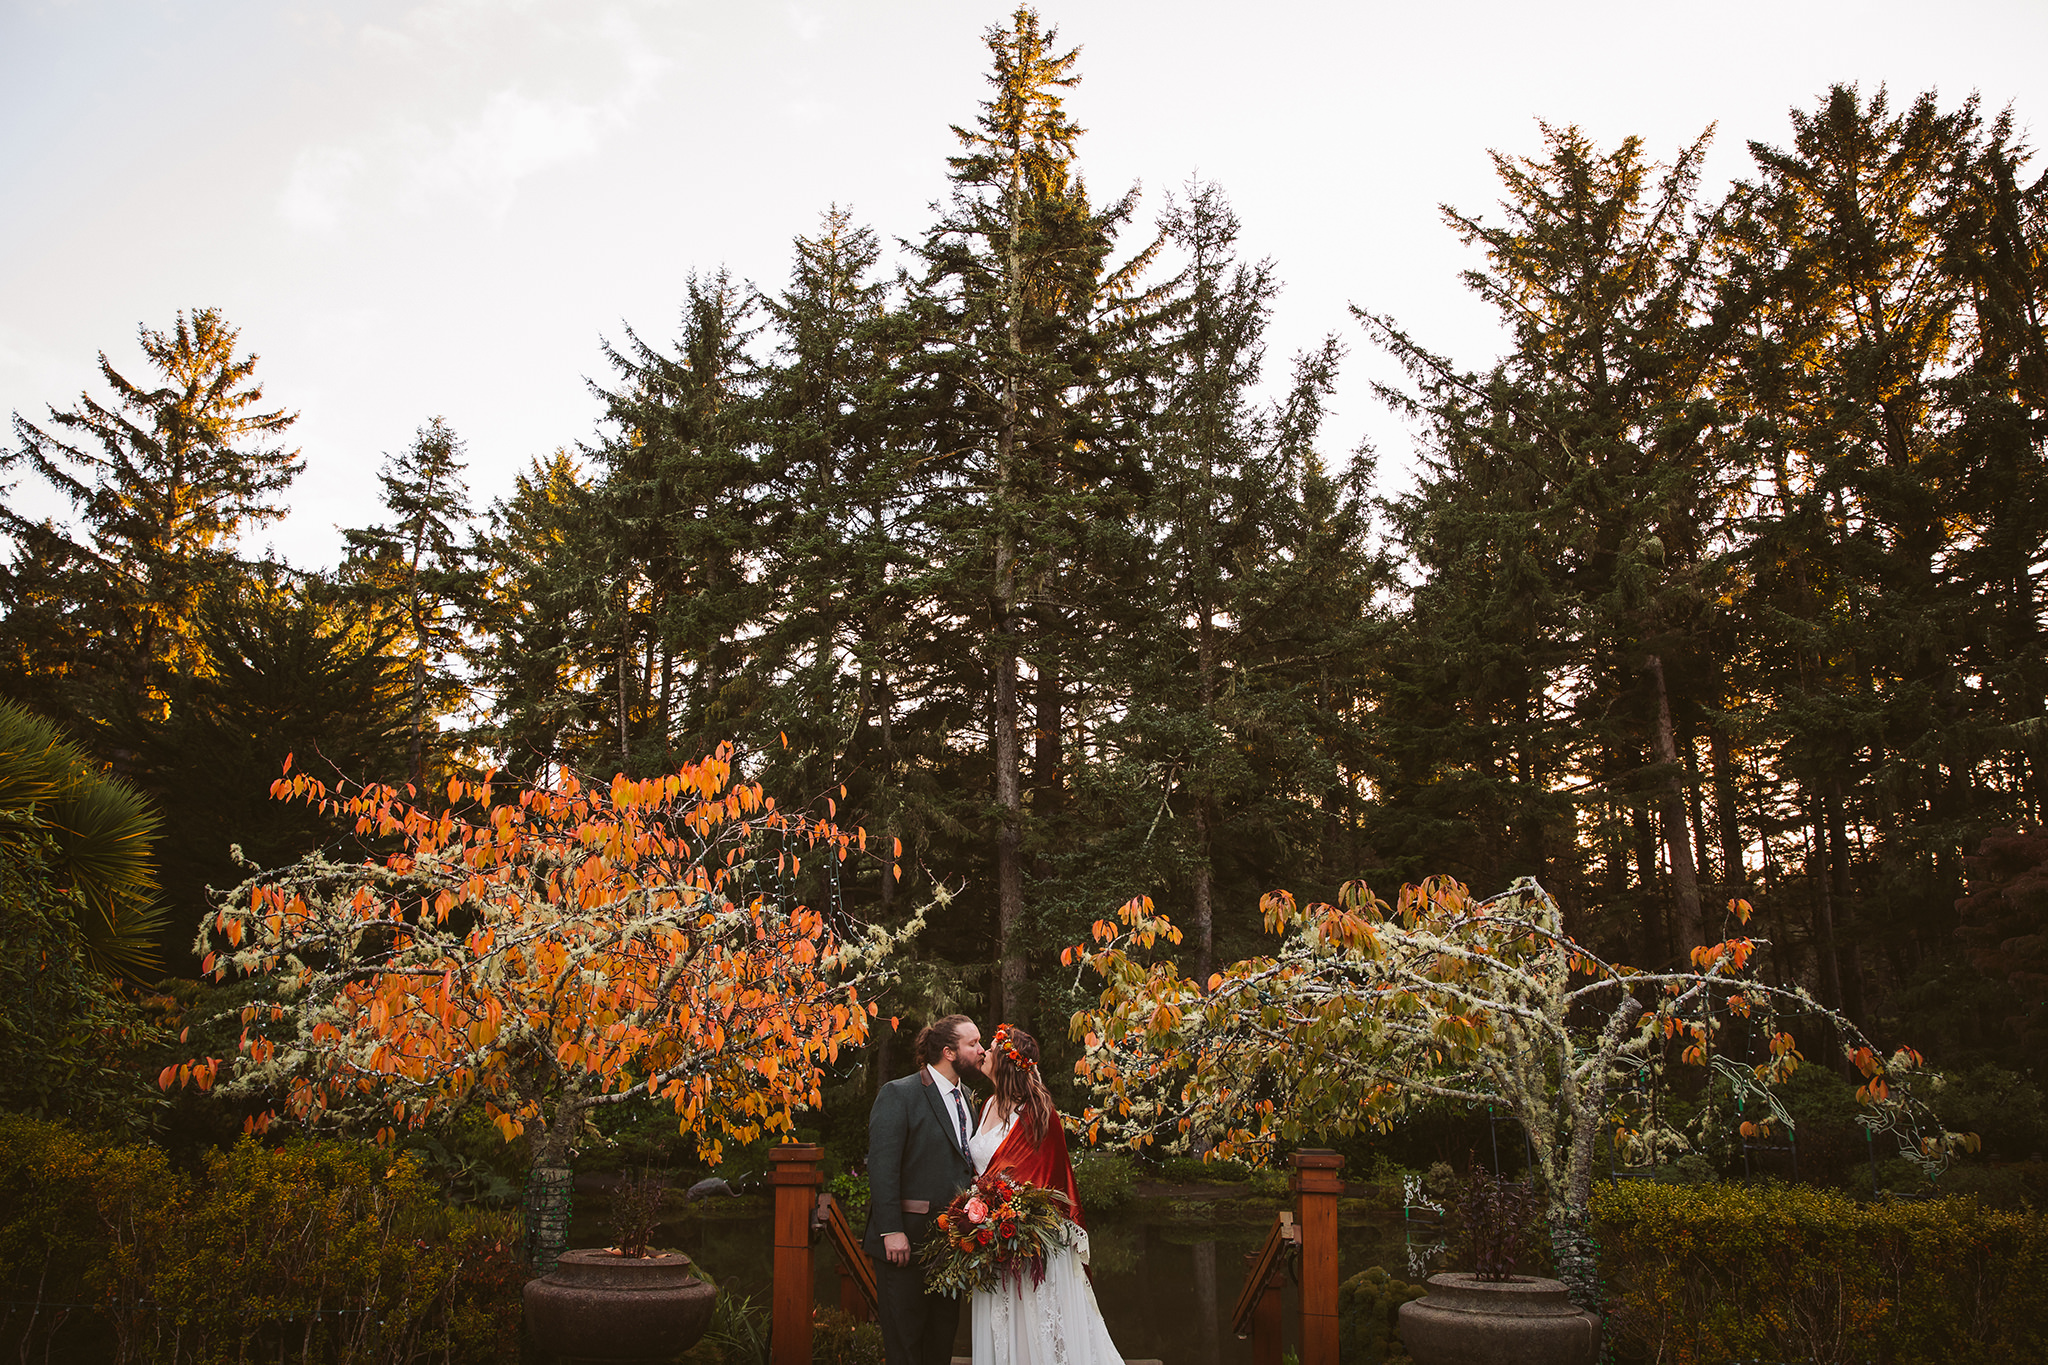 A wedding photo in the formal garden at Shore Acres State Park in Oregon